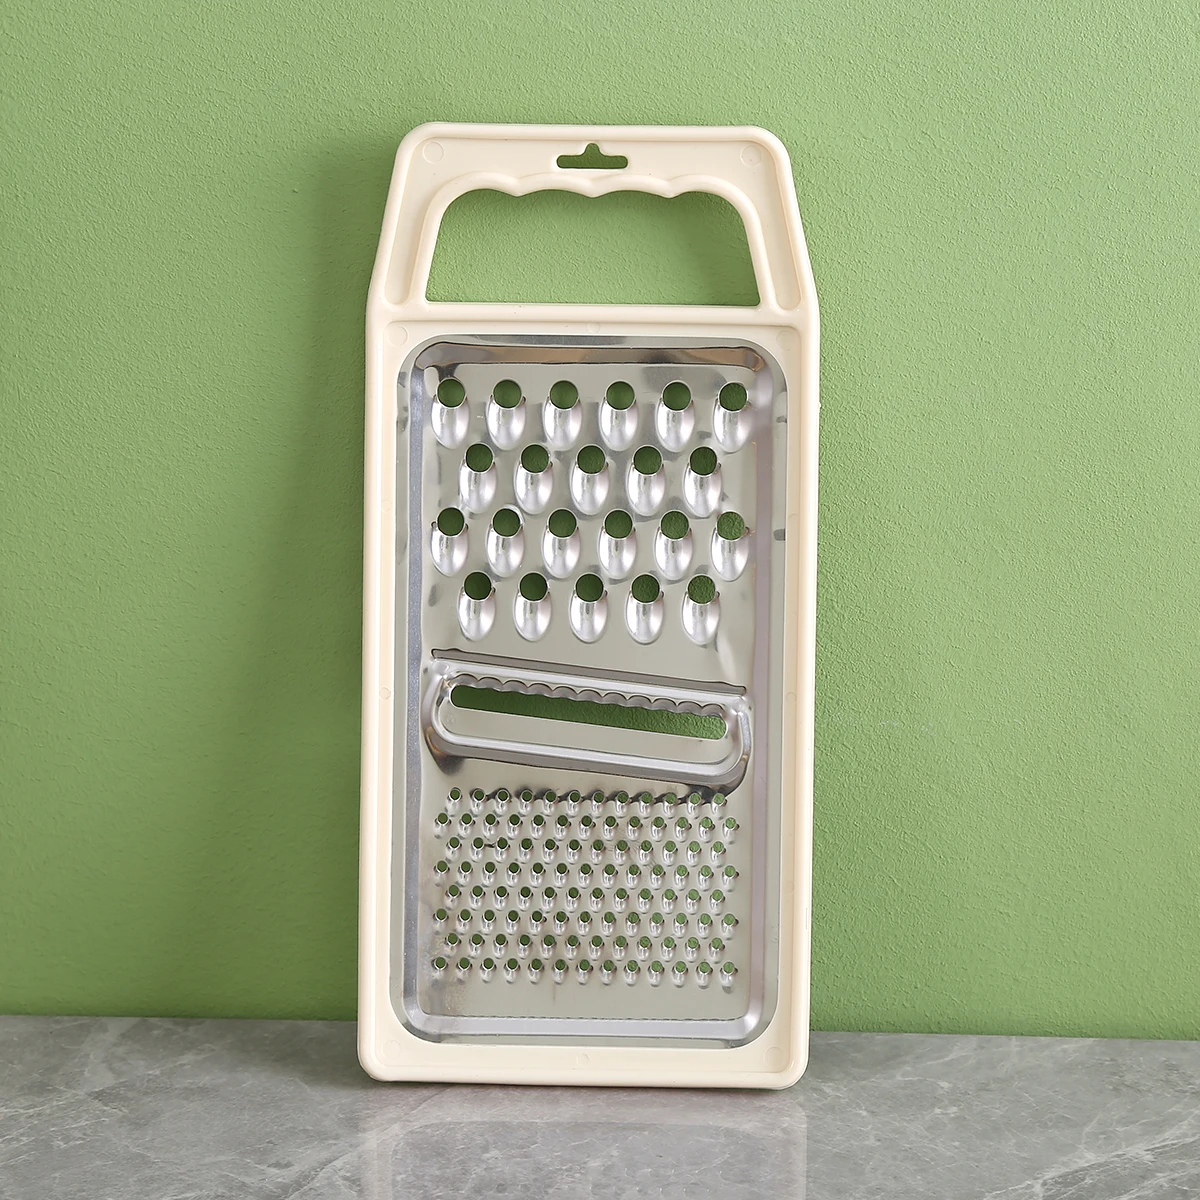 Food Grade Stainless Steel 3 in 1 Kitchen Flat Grater